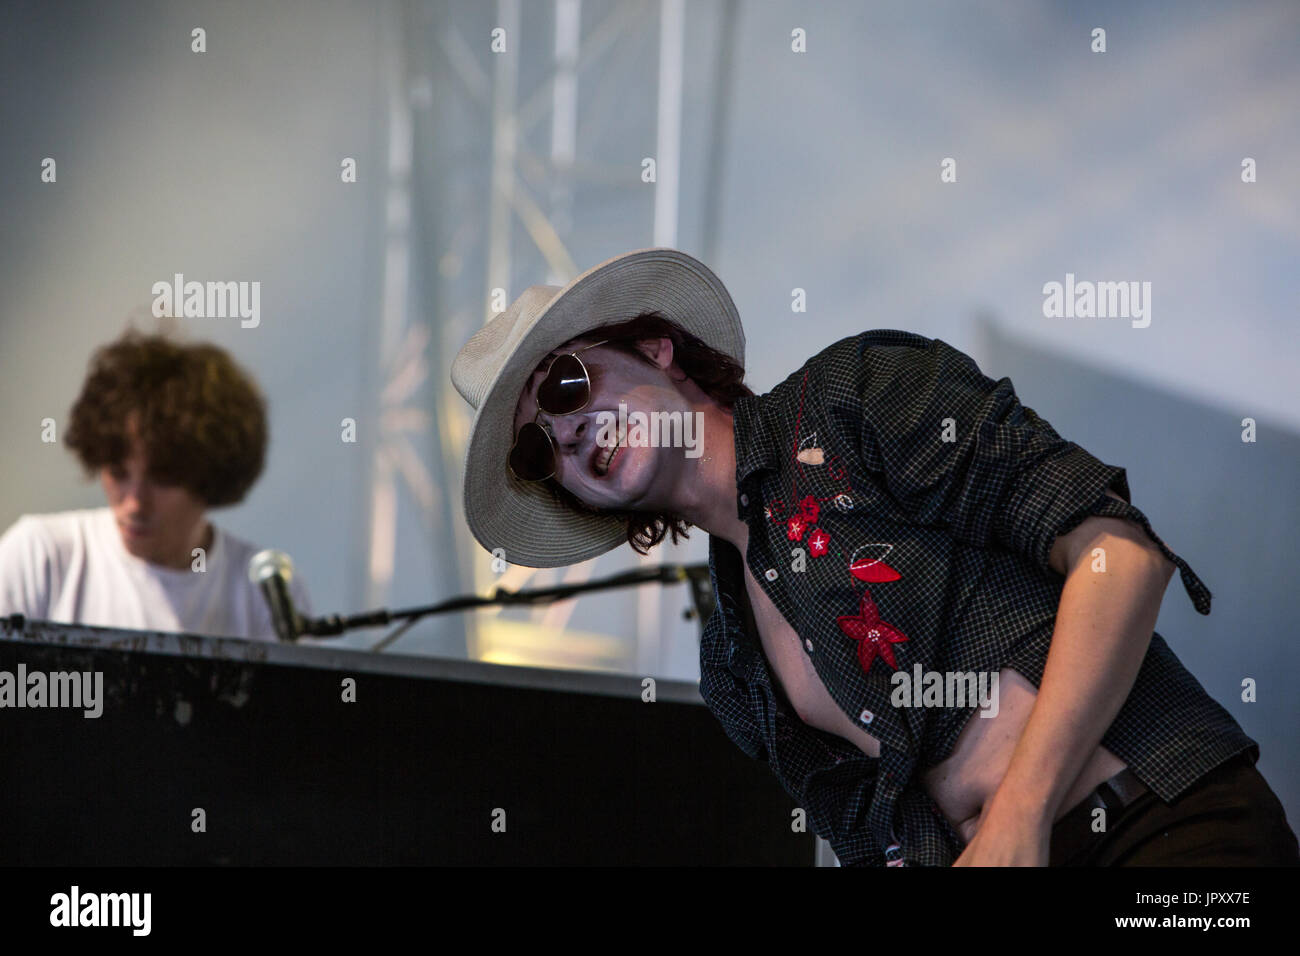 Foxygen performing live at Panorama Festival in New York City Stock Photo